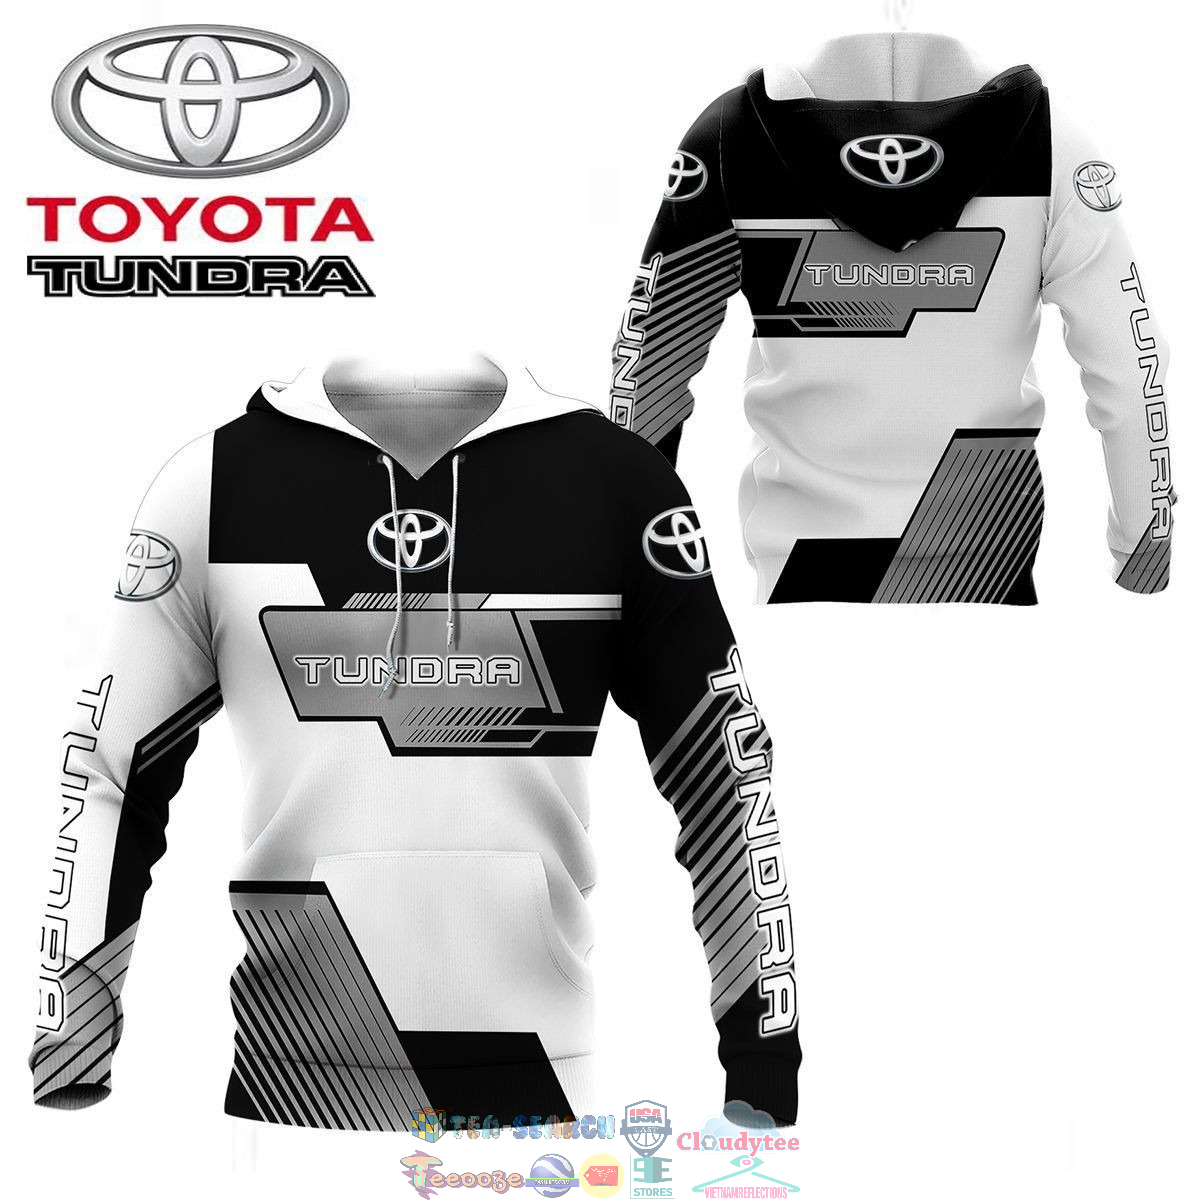 Toyota Tundra ver 16 3D hoodie and t-shirt